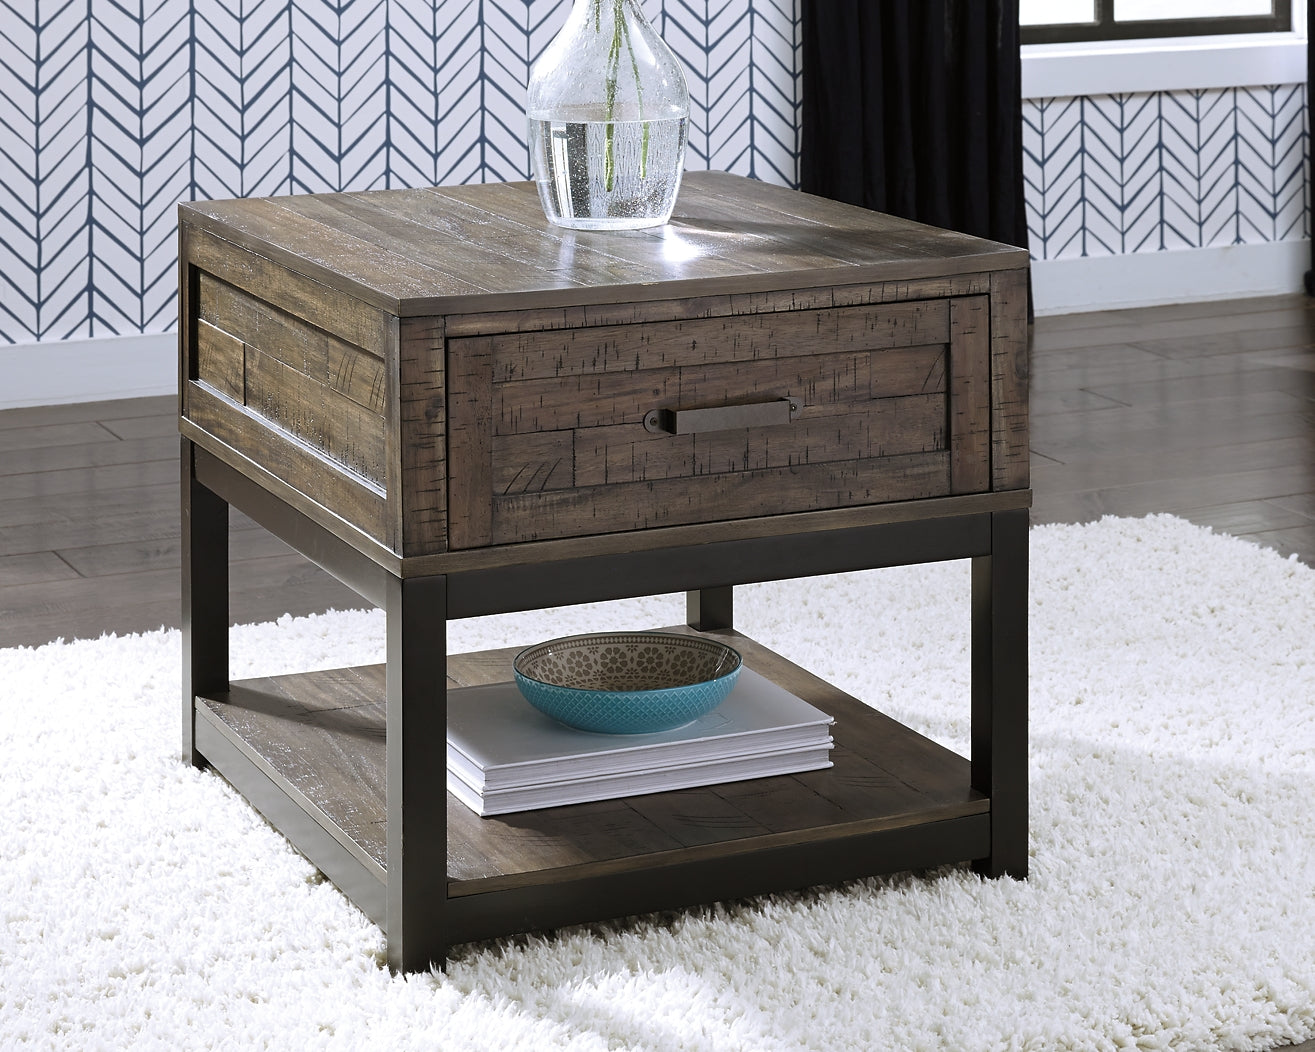 Johurst Coffee Table with 2 End Tables Wilson Furniture (OH)  in Bridgeport, Ohio. Serving Bridgeport, Yorkville, Bellaire, & Avondale